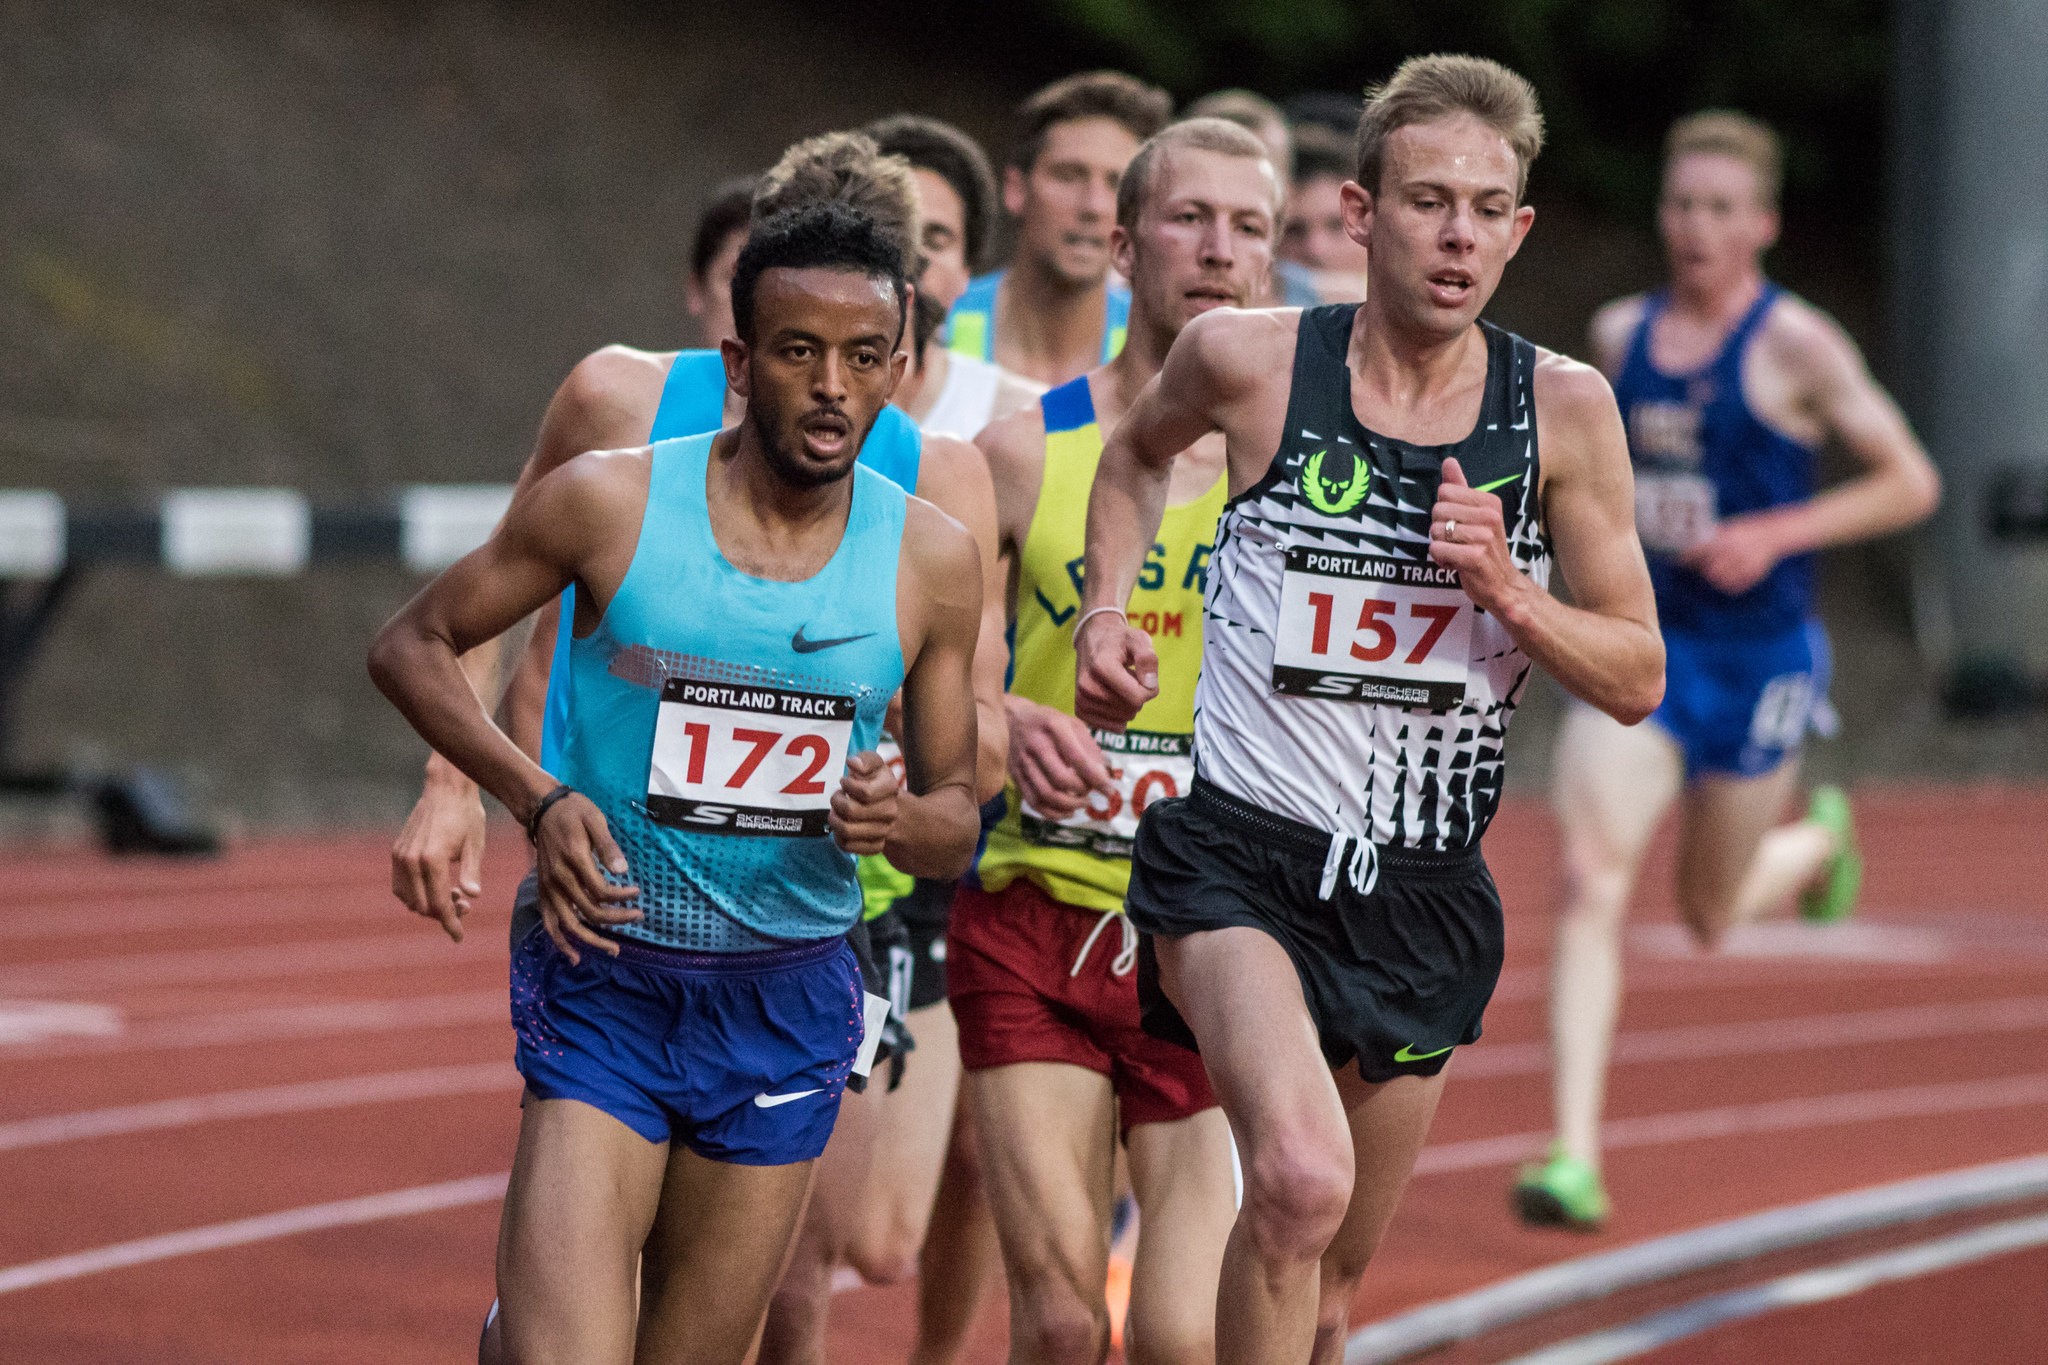 Live updates The 10k finals are on tap tonight as the USATF Outdoor